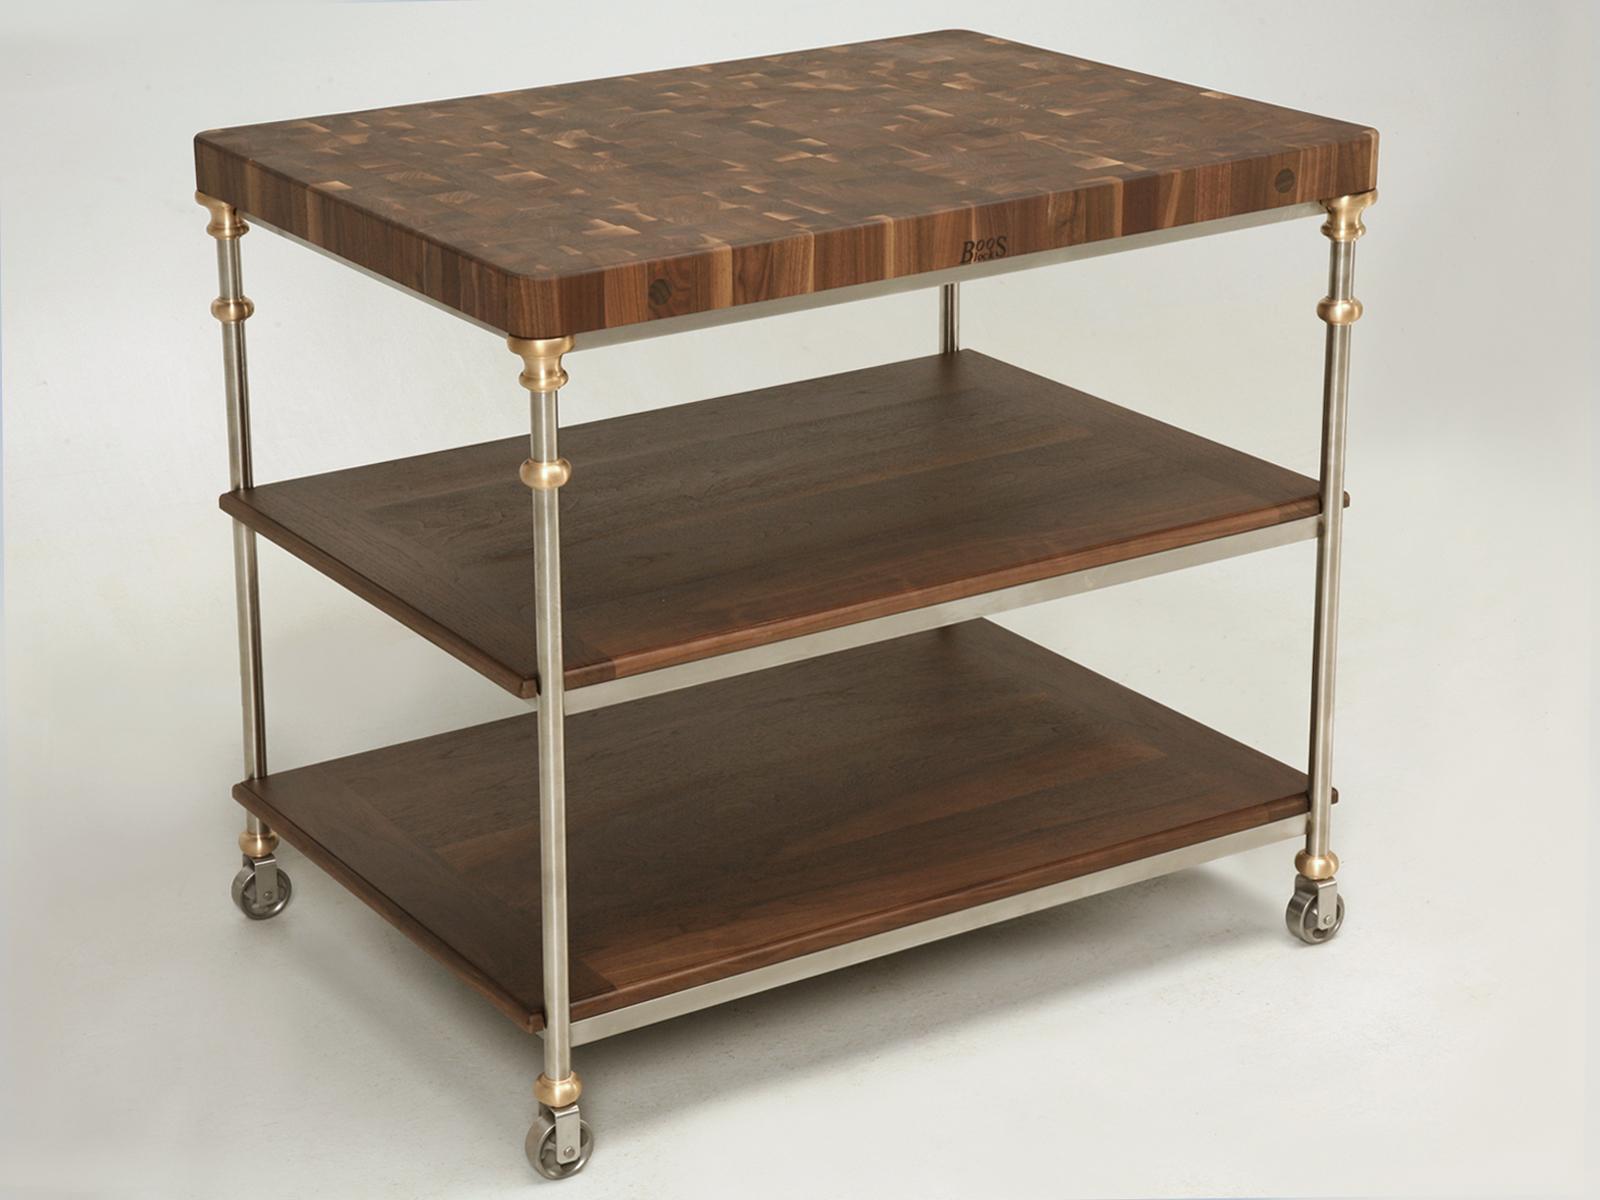 French Industrial Style Stainless Steel Kitchen Island, with a Boos Solid Walnut Butcher Block Yop and two solid walnut shelves. All of the fittings are solid bronze and the casters can be made either functional or locked permanently. Since we